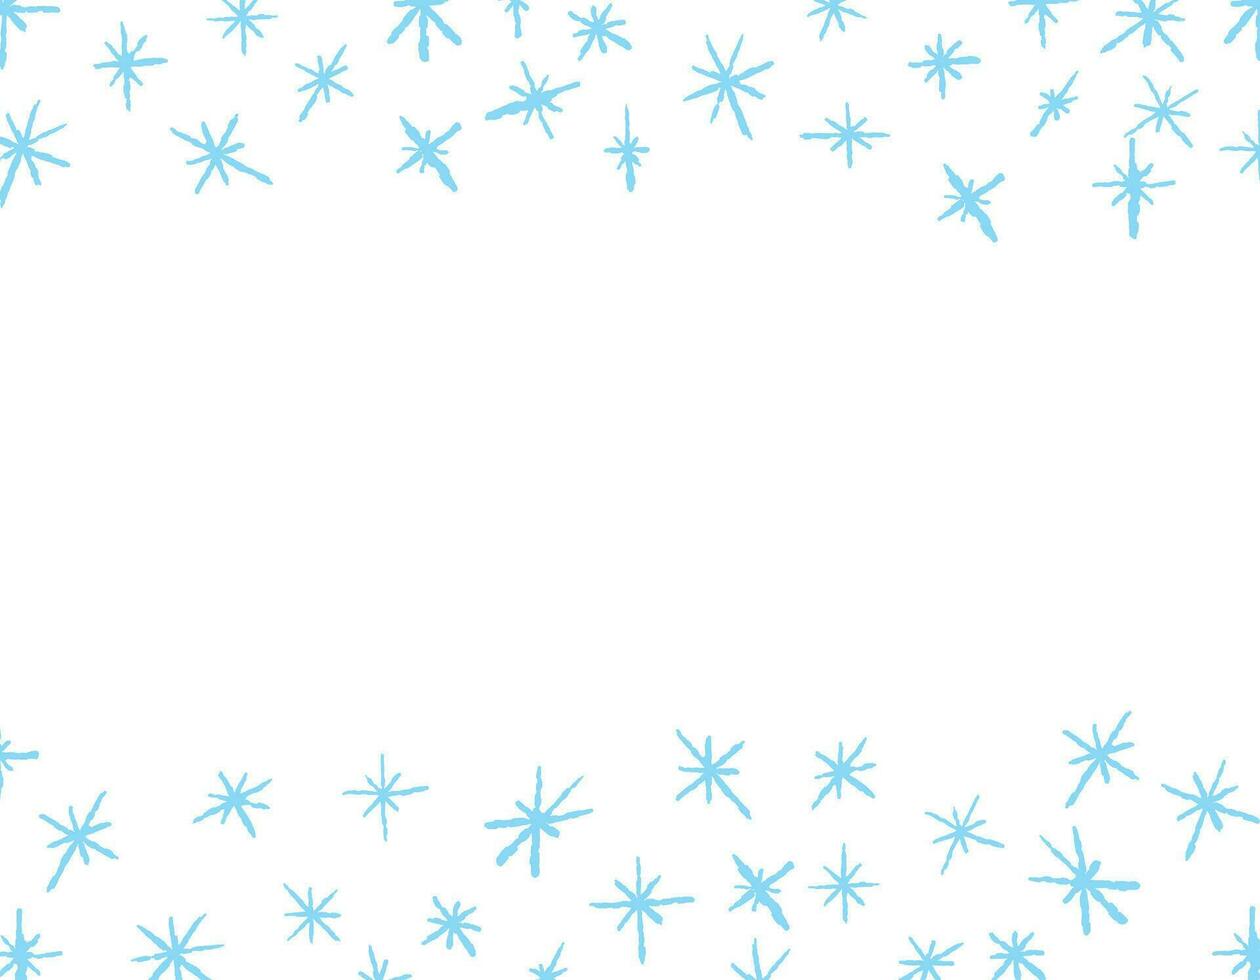 Snowflake background, frame for text. Vector graphics drawn with a brush. Doodle illustration